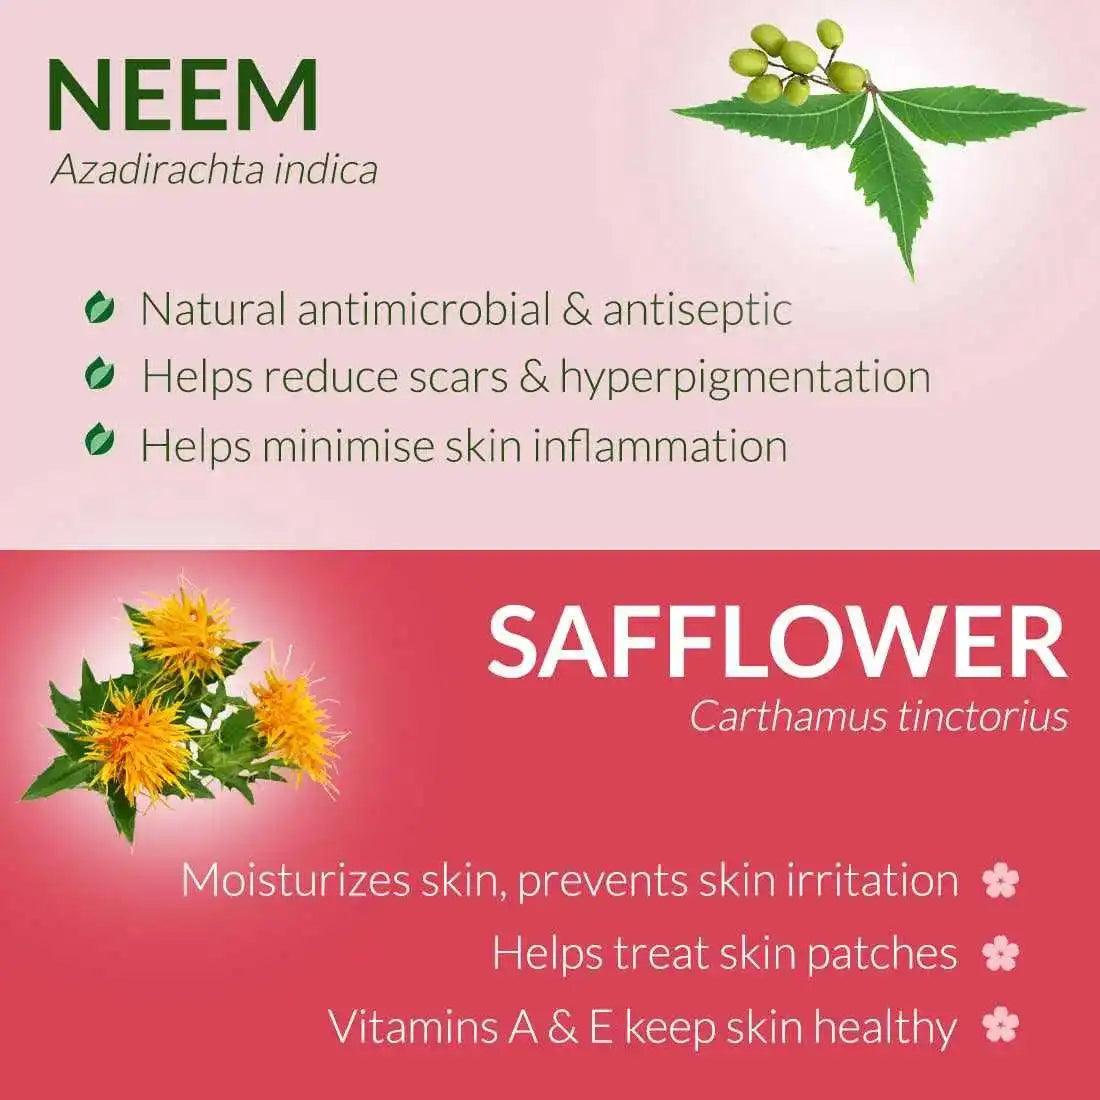 everteen XL Sanitary Napkins are enriched with Neem, a antimicrobial that helps reduce pigmentation, and with safflower that keeps intimate skin healthy and reduces irritation - everteen-neud.com